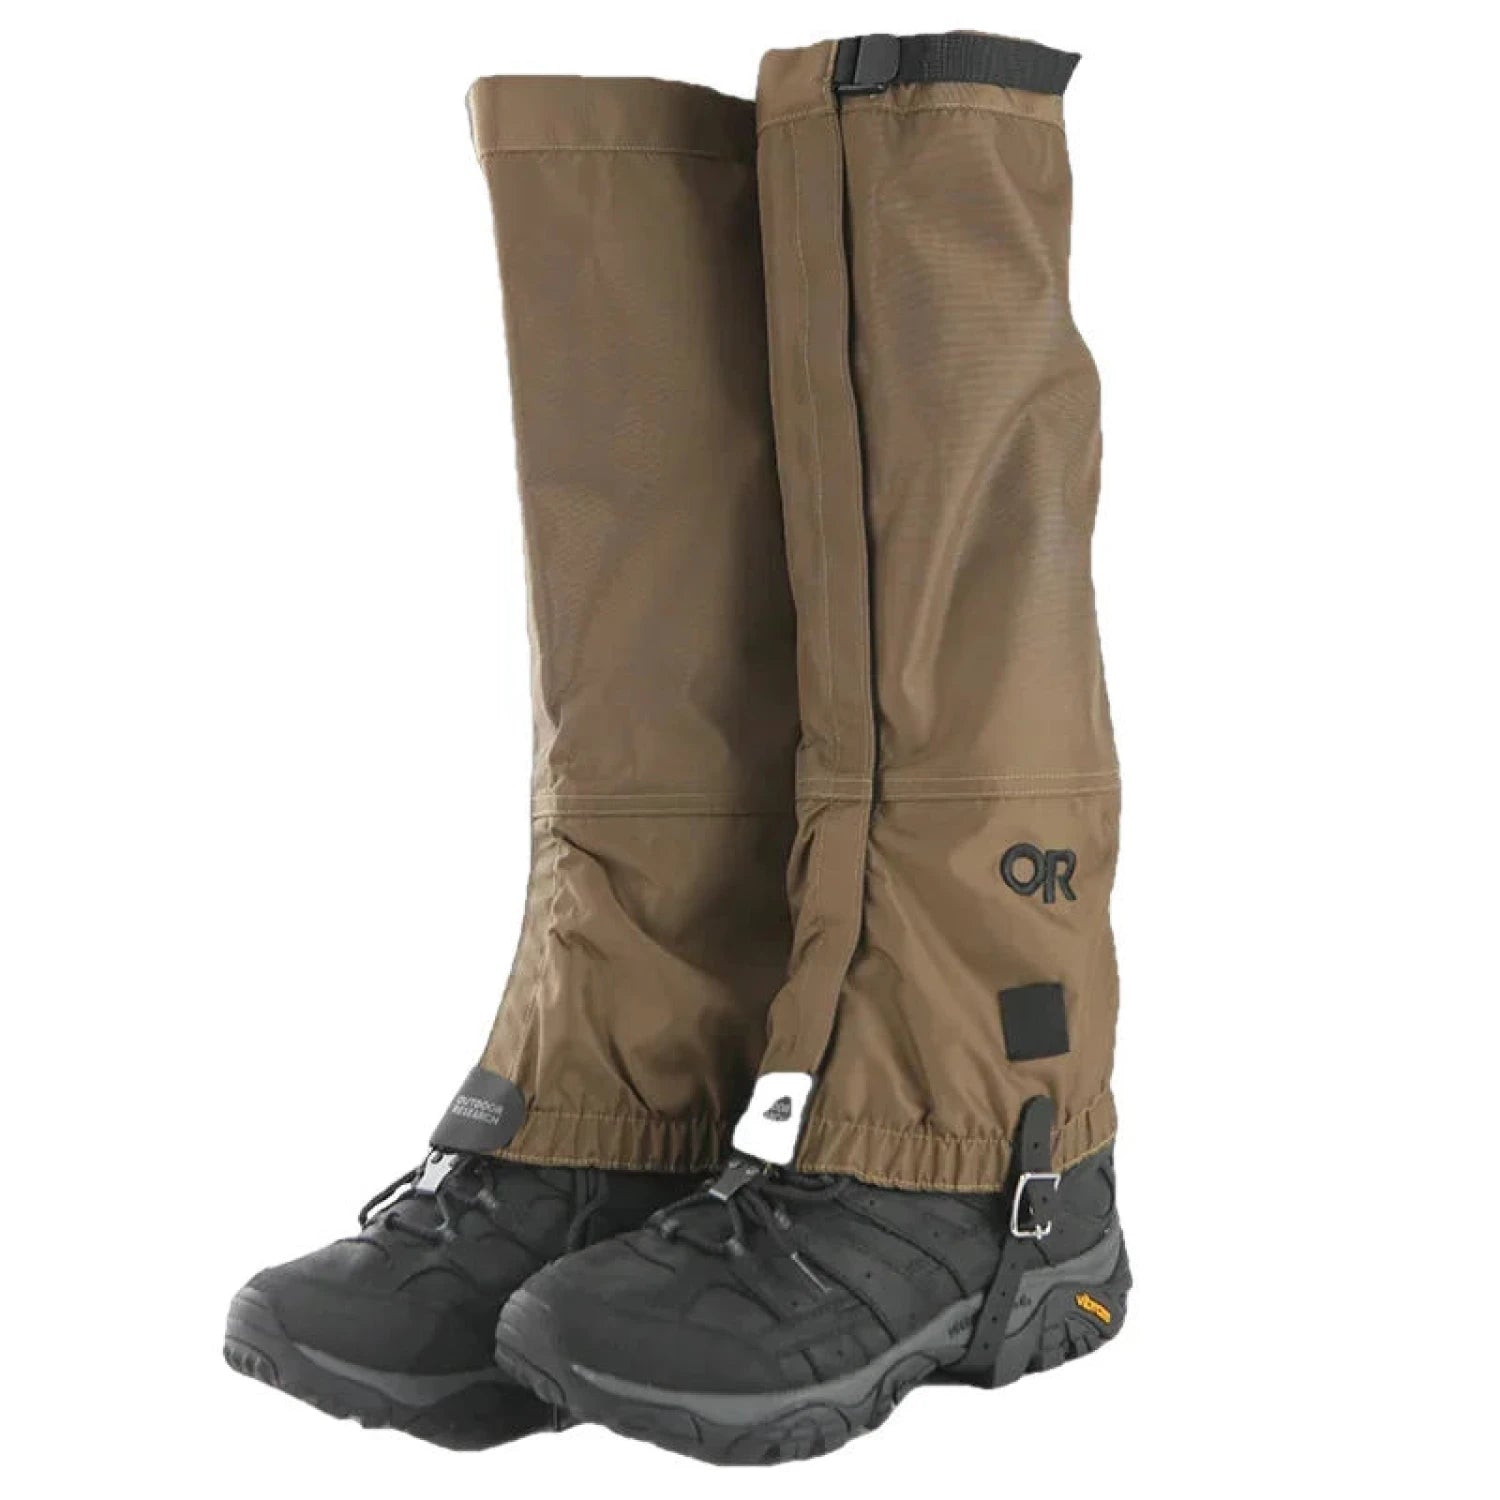 Outdoor Research Men's Rocky Mountain High Gaiters shown in Coyote a brown color,  and attached to black boots (not included in sale), with black embroidered OR logo.  